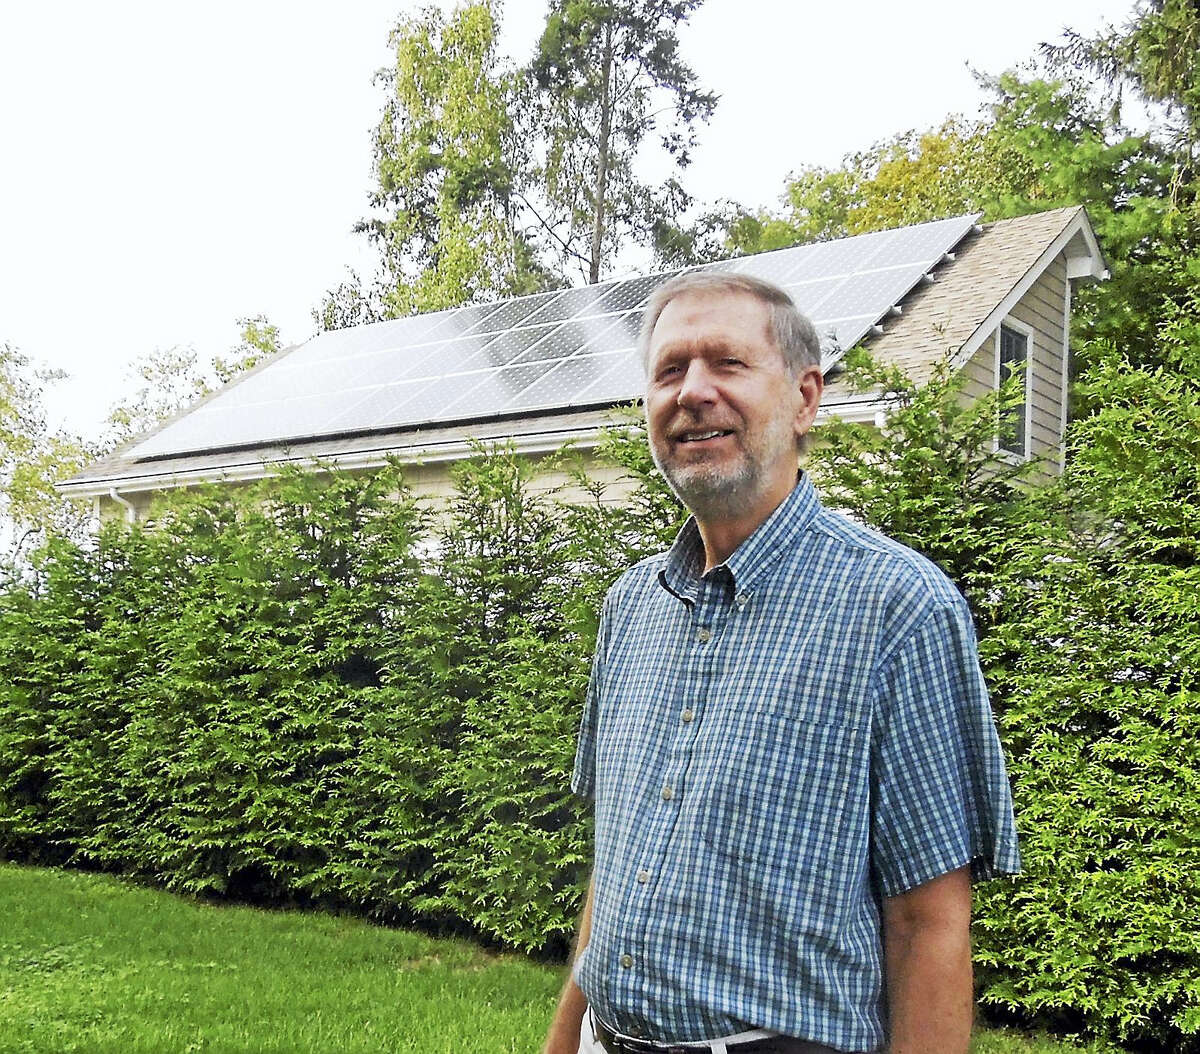 Contributed photo East Hampton resident Marty Podskoch has a 8kW system and pays the monthly $19.25 service charge — and that’s it, he says.